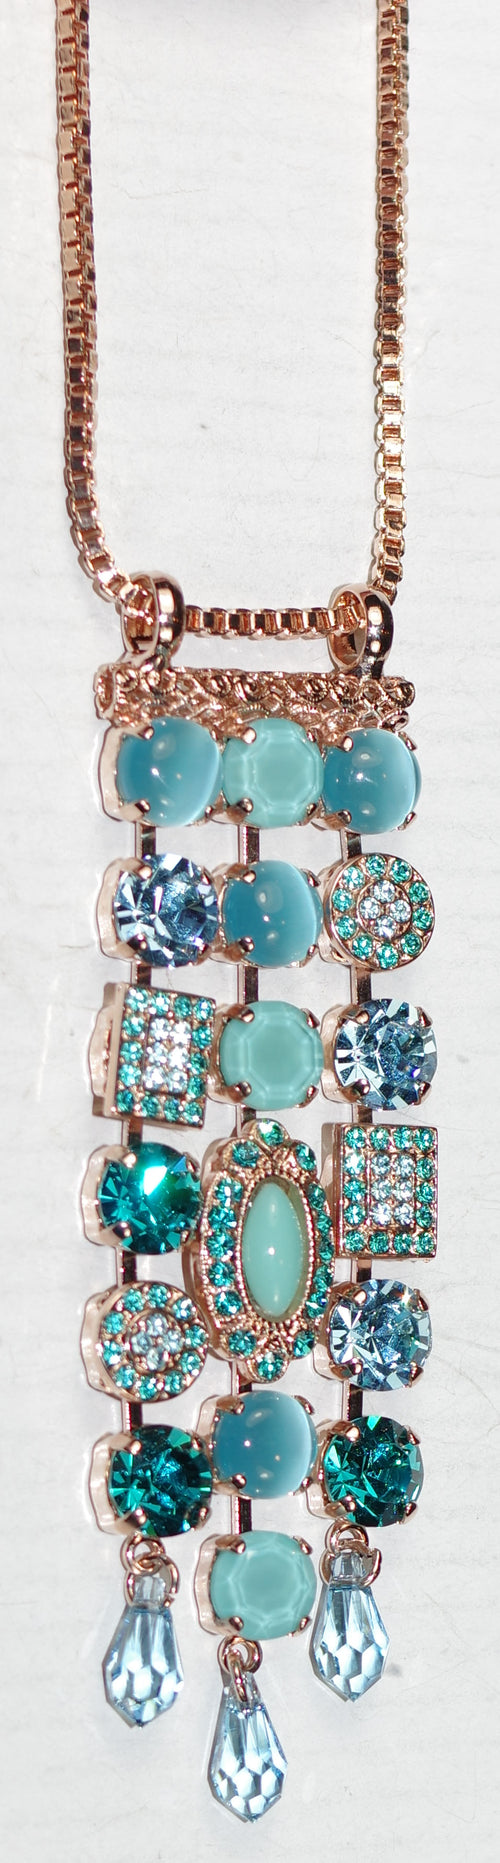 MARIANA PENDANT ADDICTED TO LOVE: blue, teal stones in 3.5" rose gold setting, 28" adjustable chain